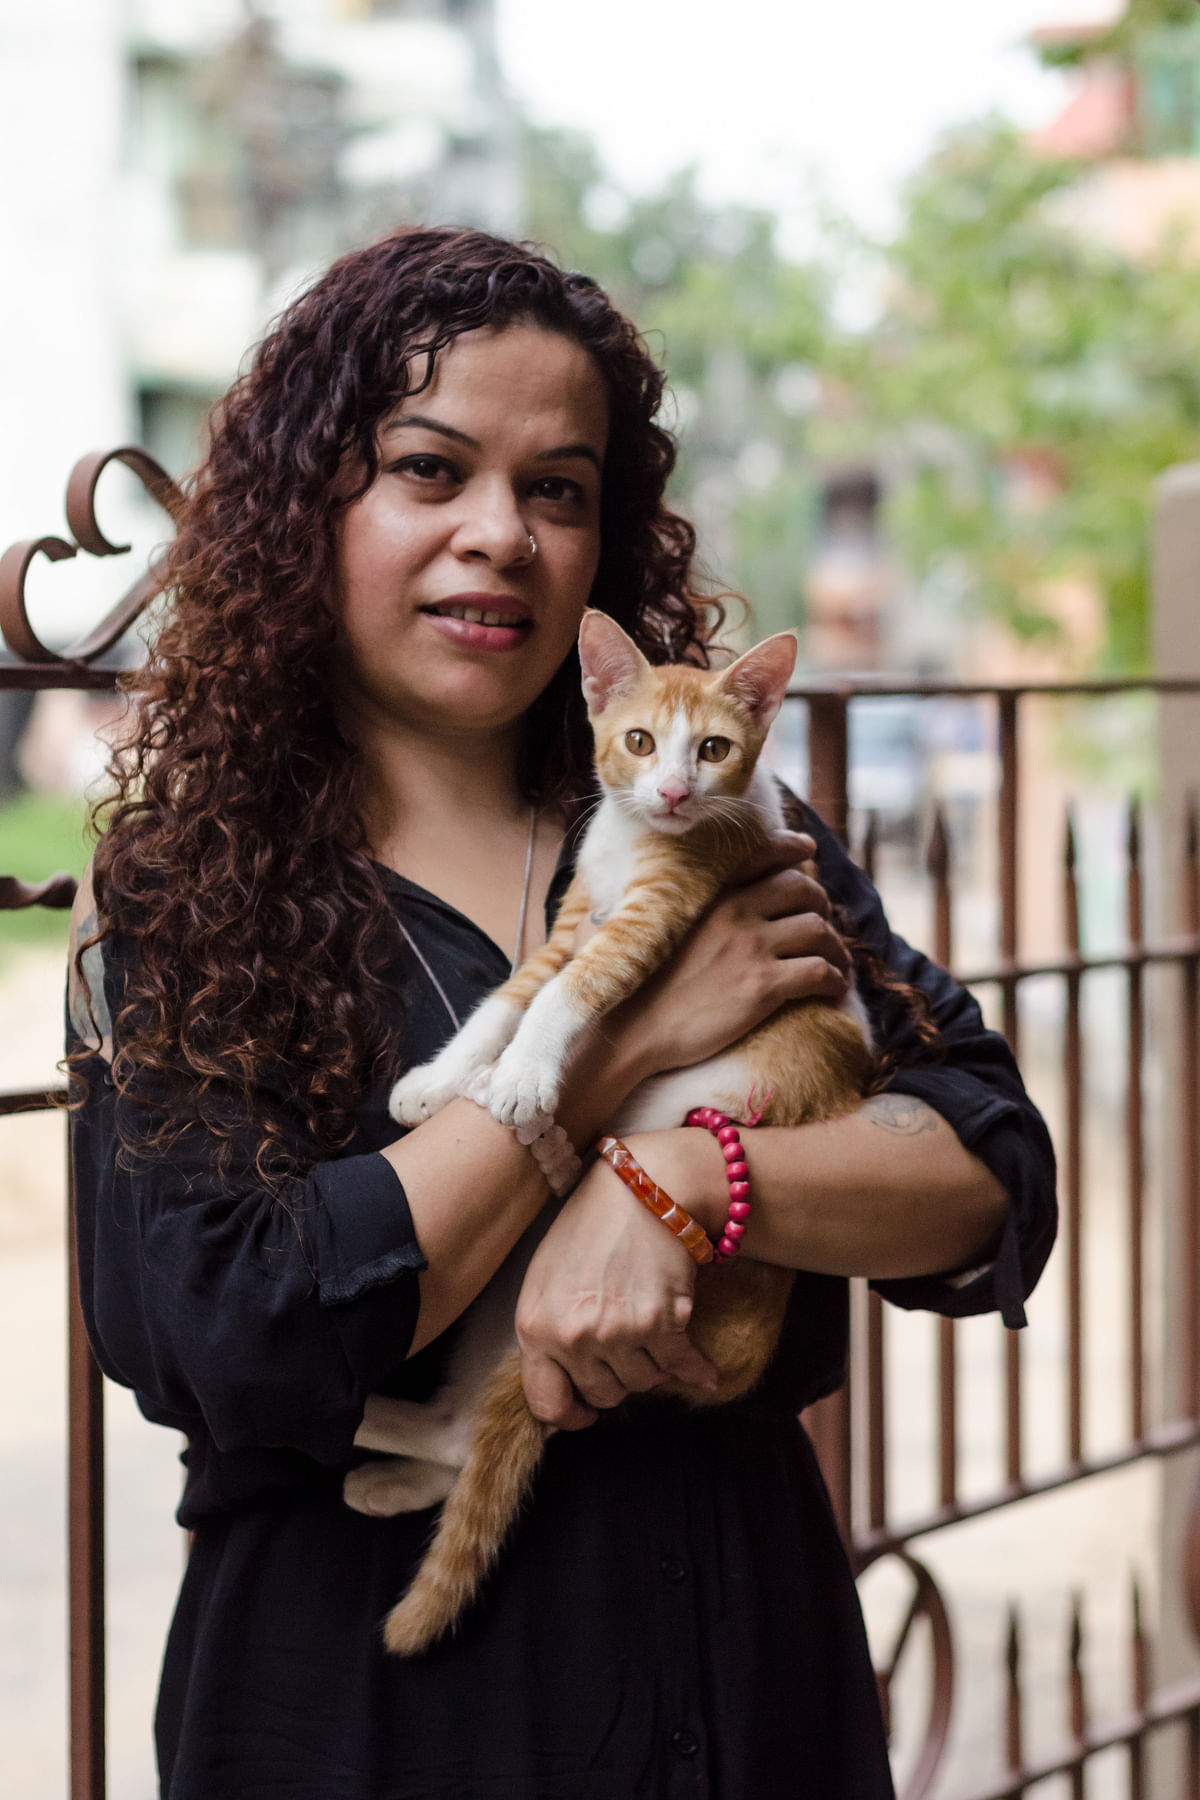 Remembering the life and courage of Suzette Jordan, the survivor of a brutal gang rape and a mother of two daughters